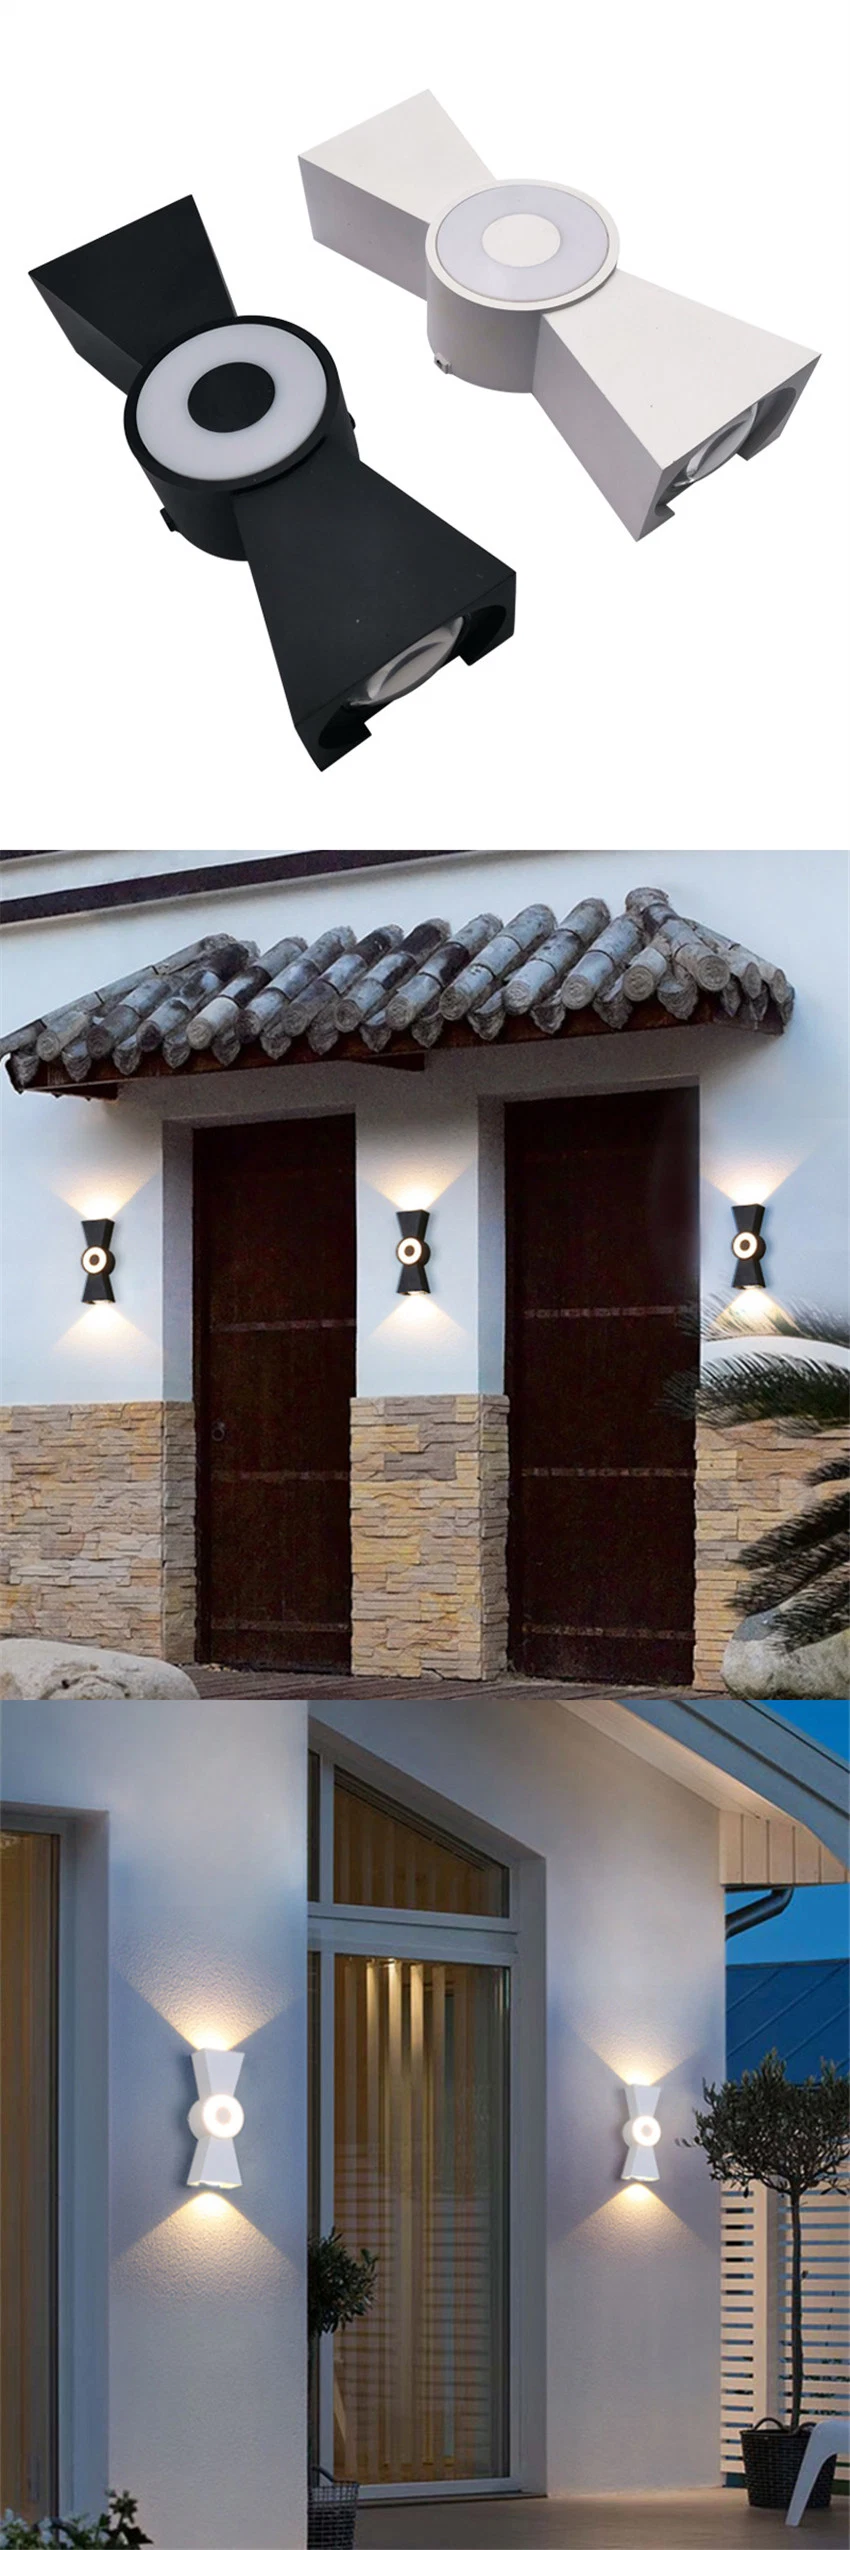 Double Head up and Down Wall Lamps Outdoor Waterproof Corridor Kitchen Lighting Fixture LED Wandlamp 9W Made in China